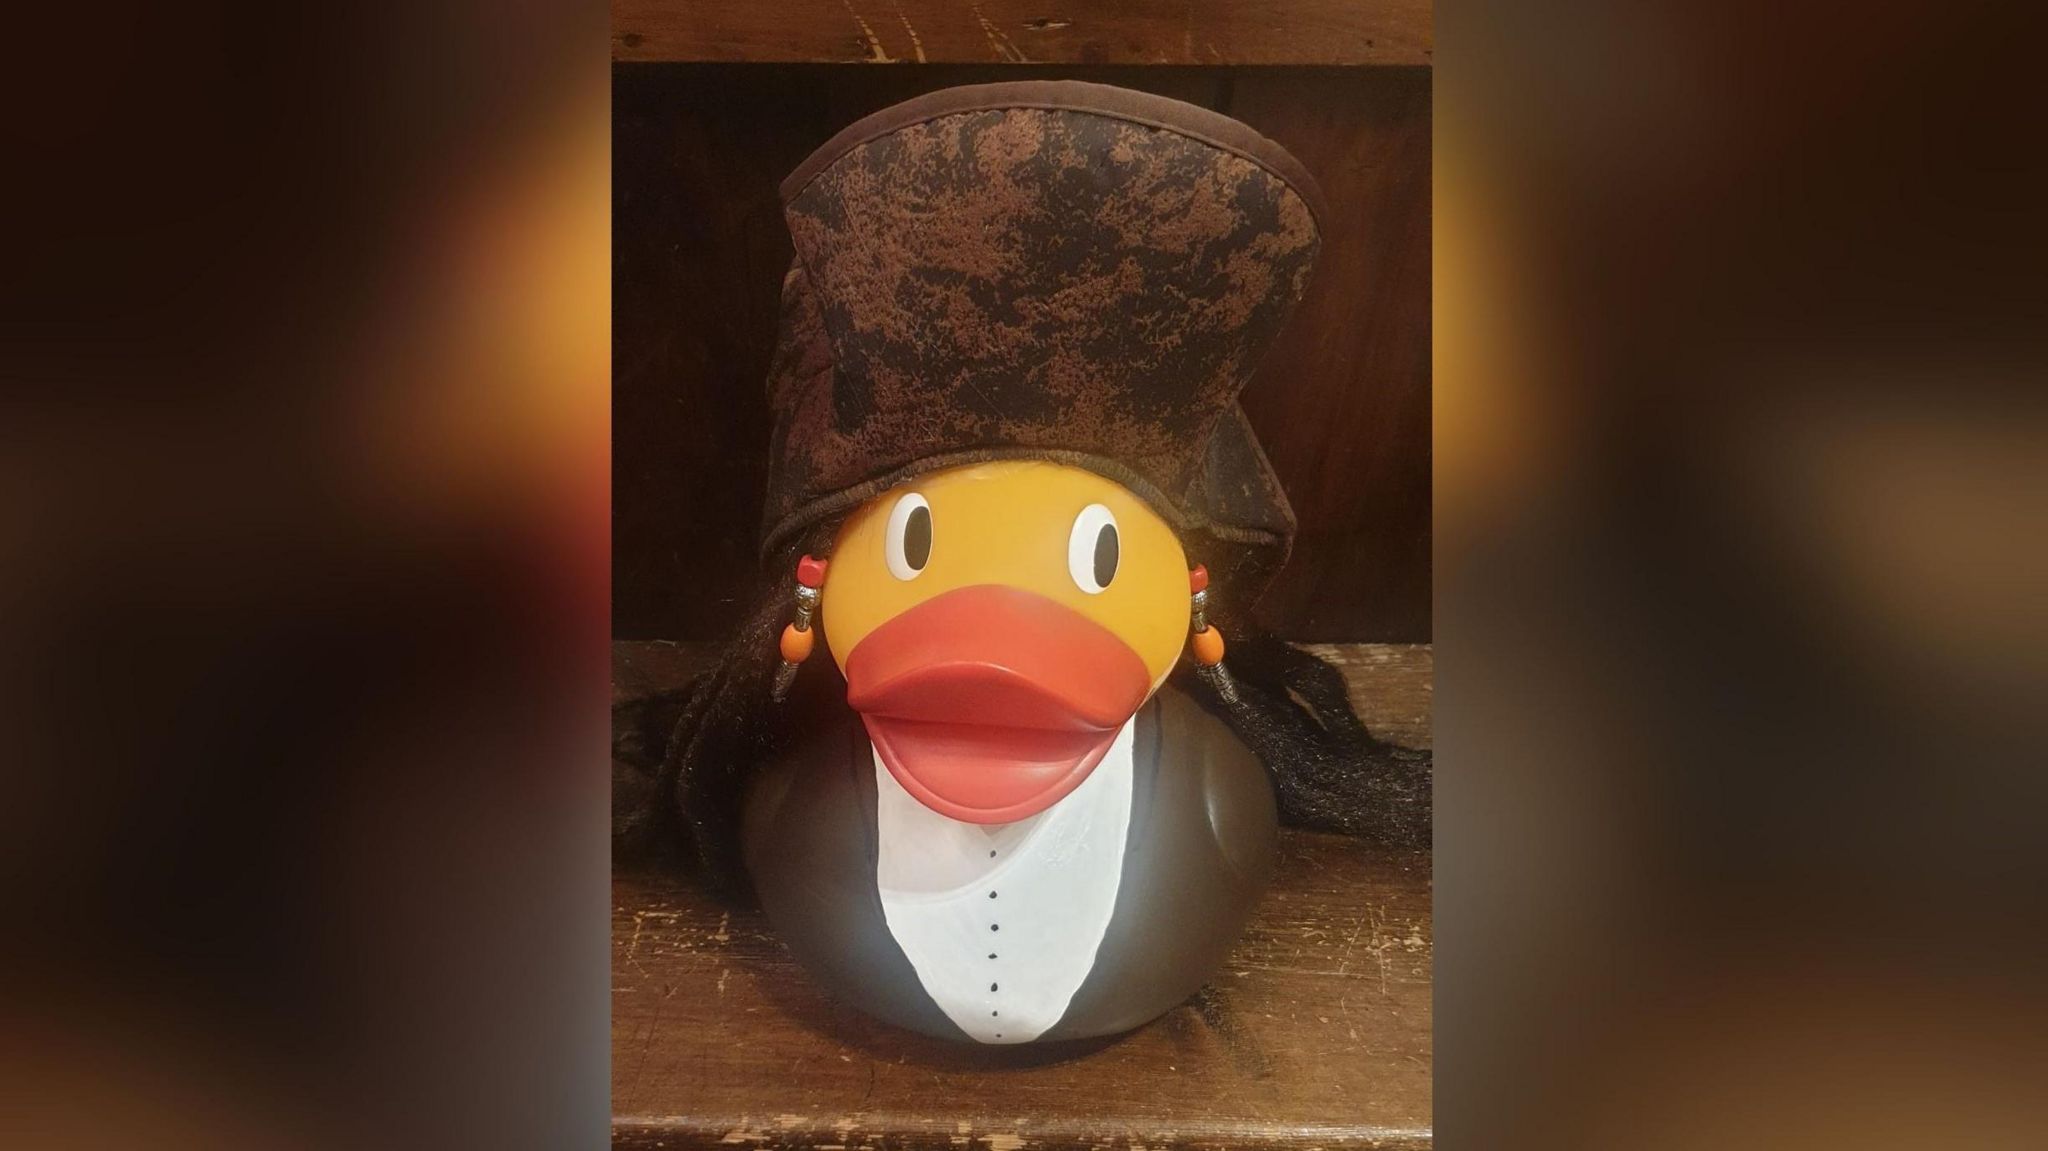 A duck decorated like Captain Jack Sparrow from Pirates of the Carribean